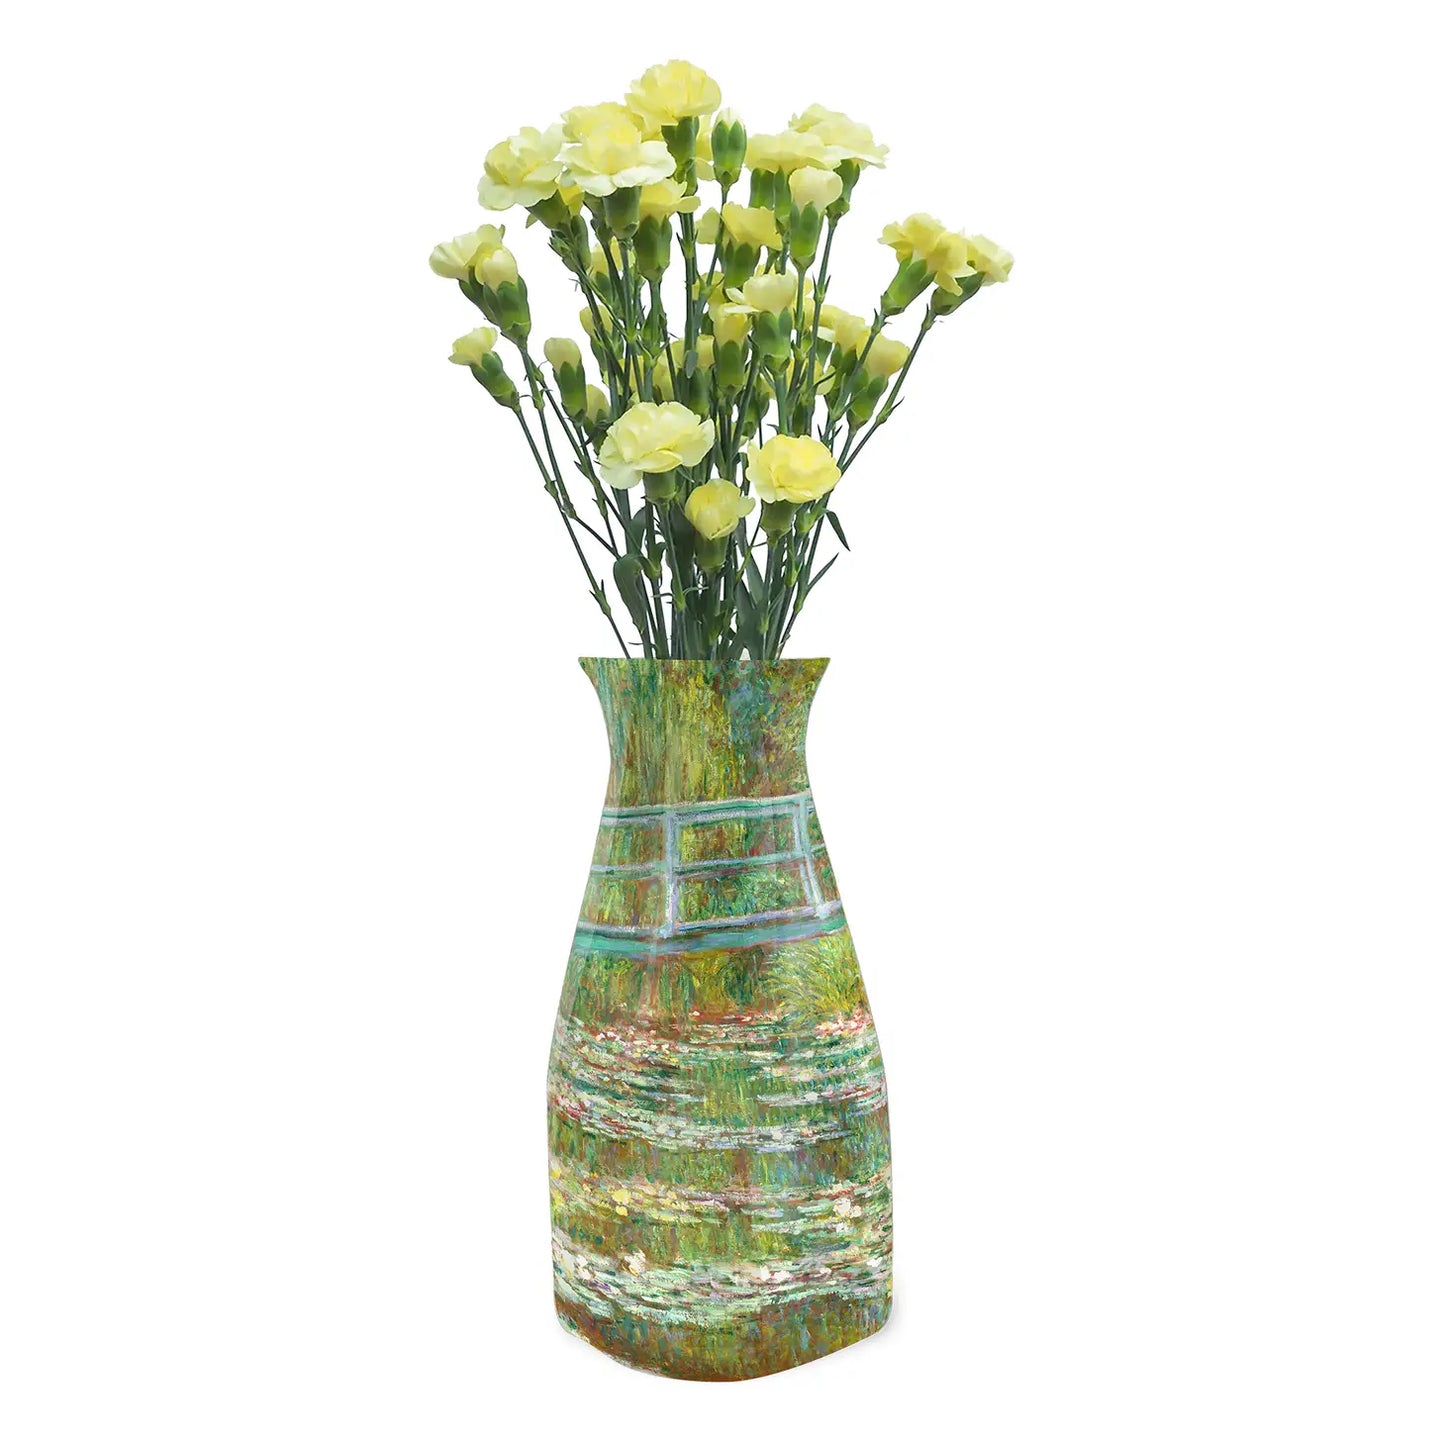 Expandable Flower Vase - Monet Water Lily Pond